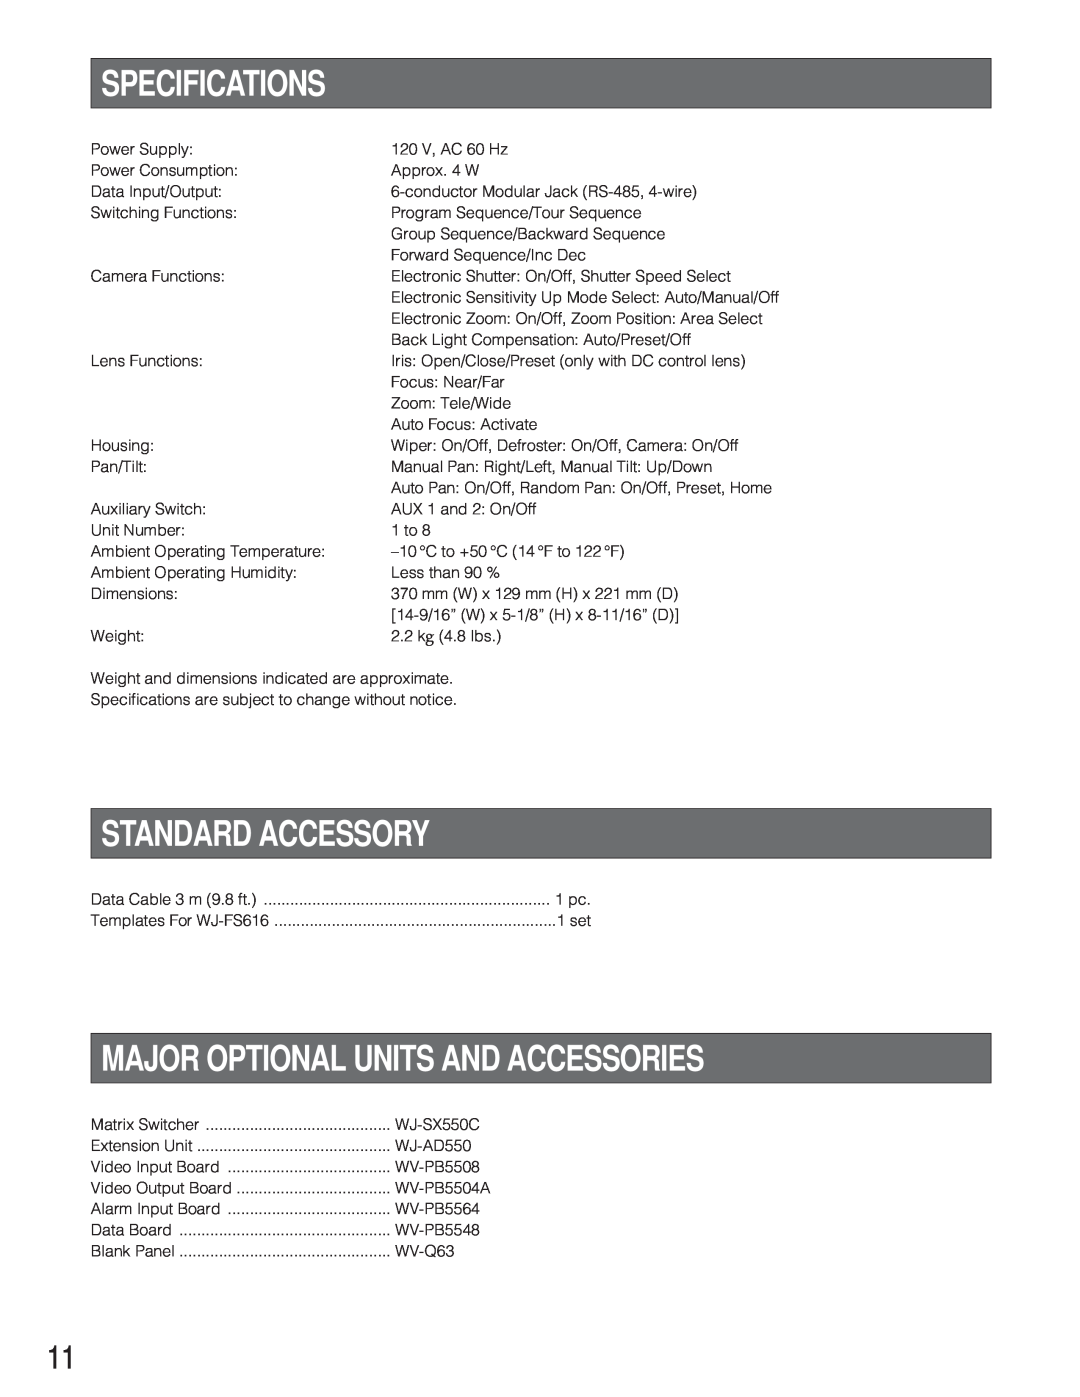 Panasonic WV-CU550CJ manual Specifications, Standard Accessory, Major Optional Units And Accessories, WV-PB5504A 